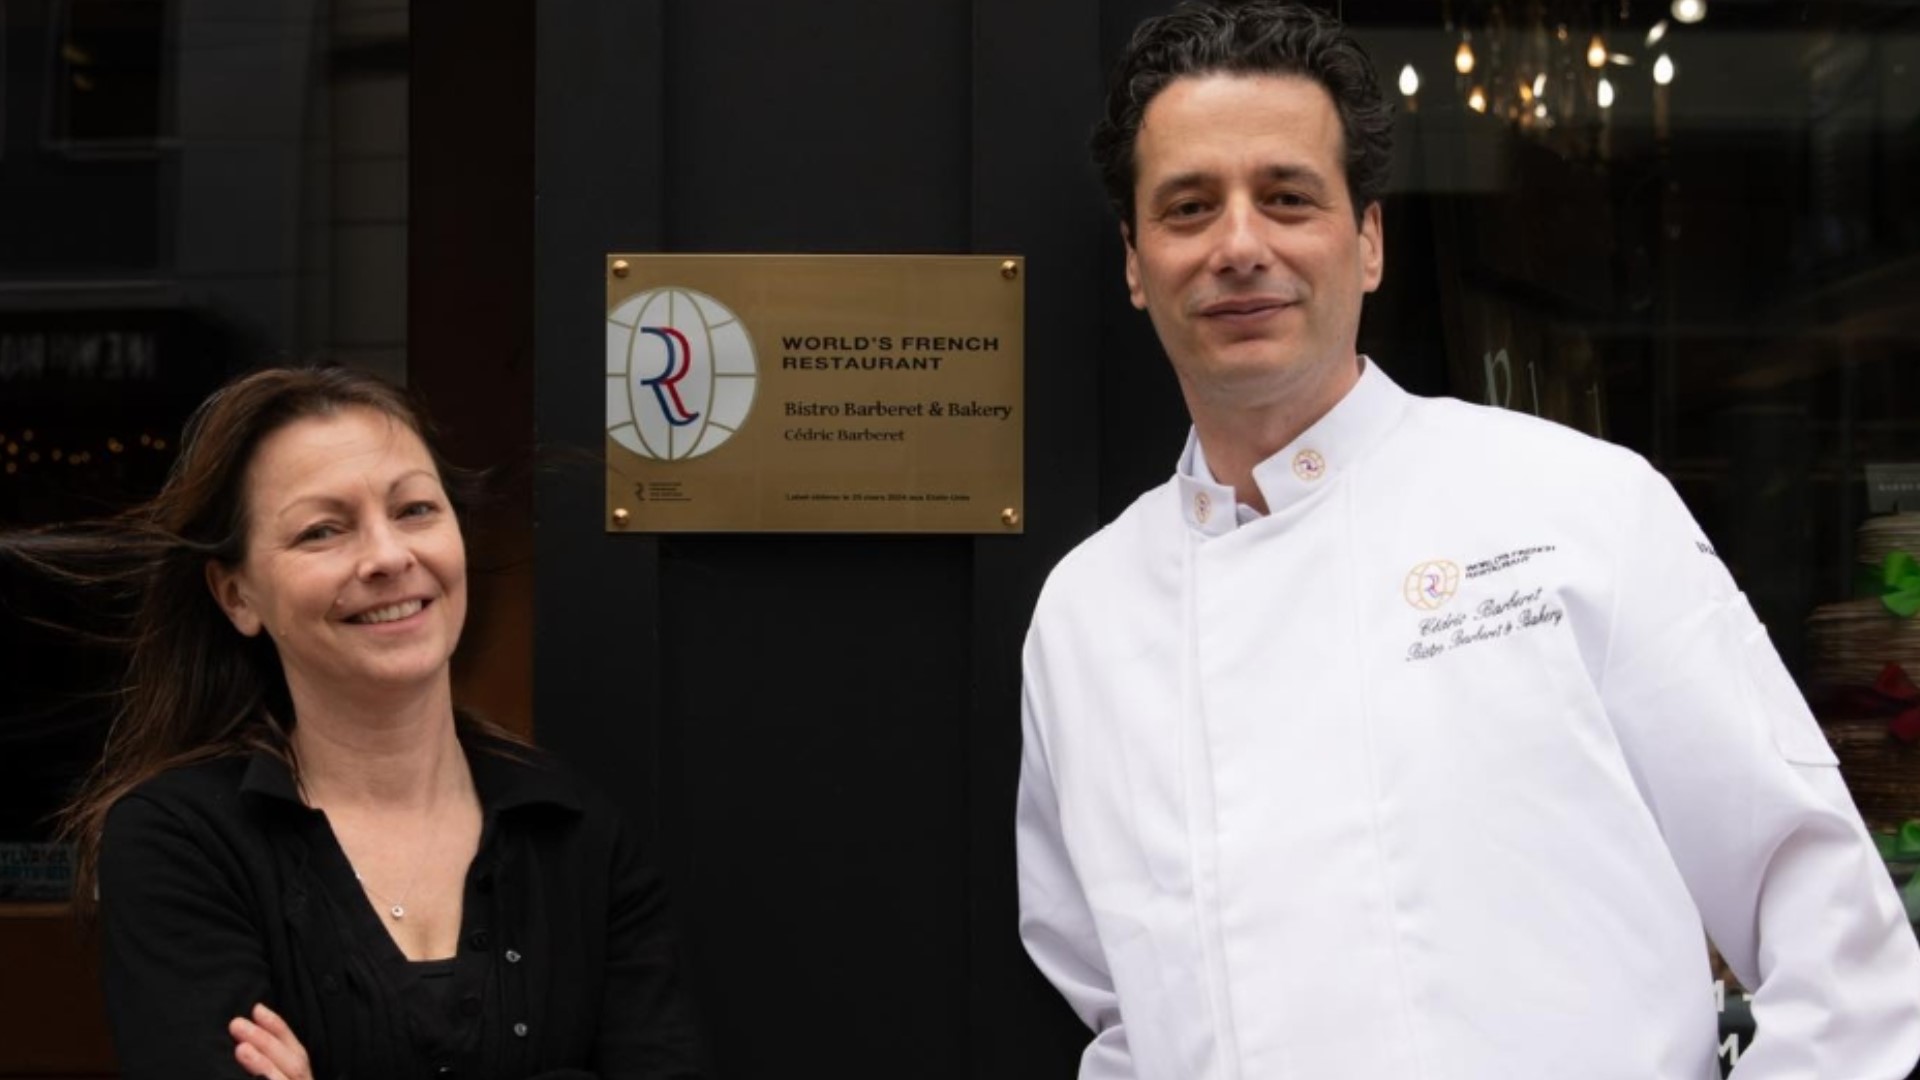 Barberet Bistro and Bakery, located at 26 E. King St., was given the award by the French Association of Master Restauranteurs.